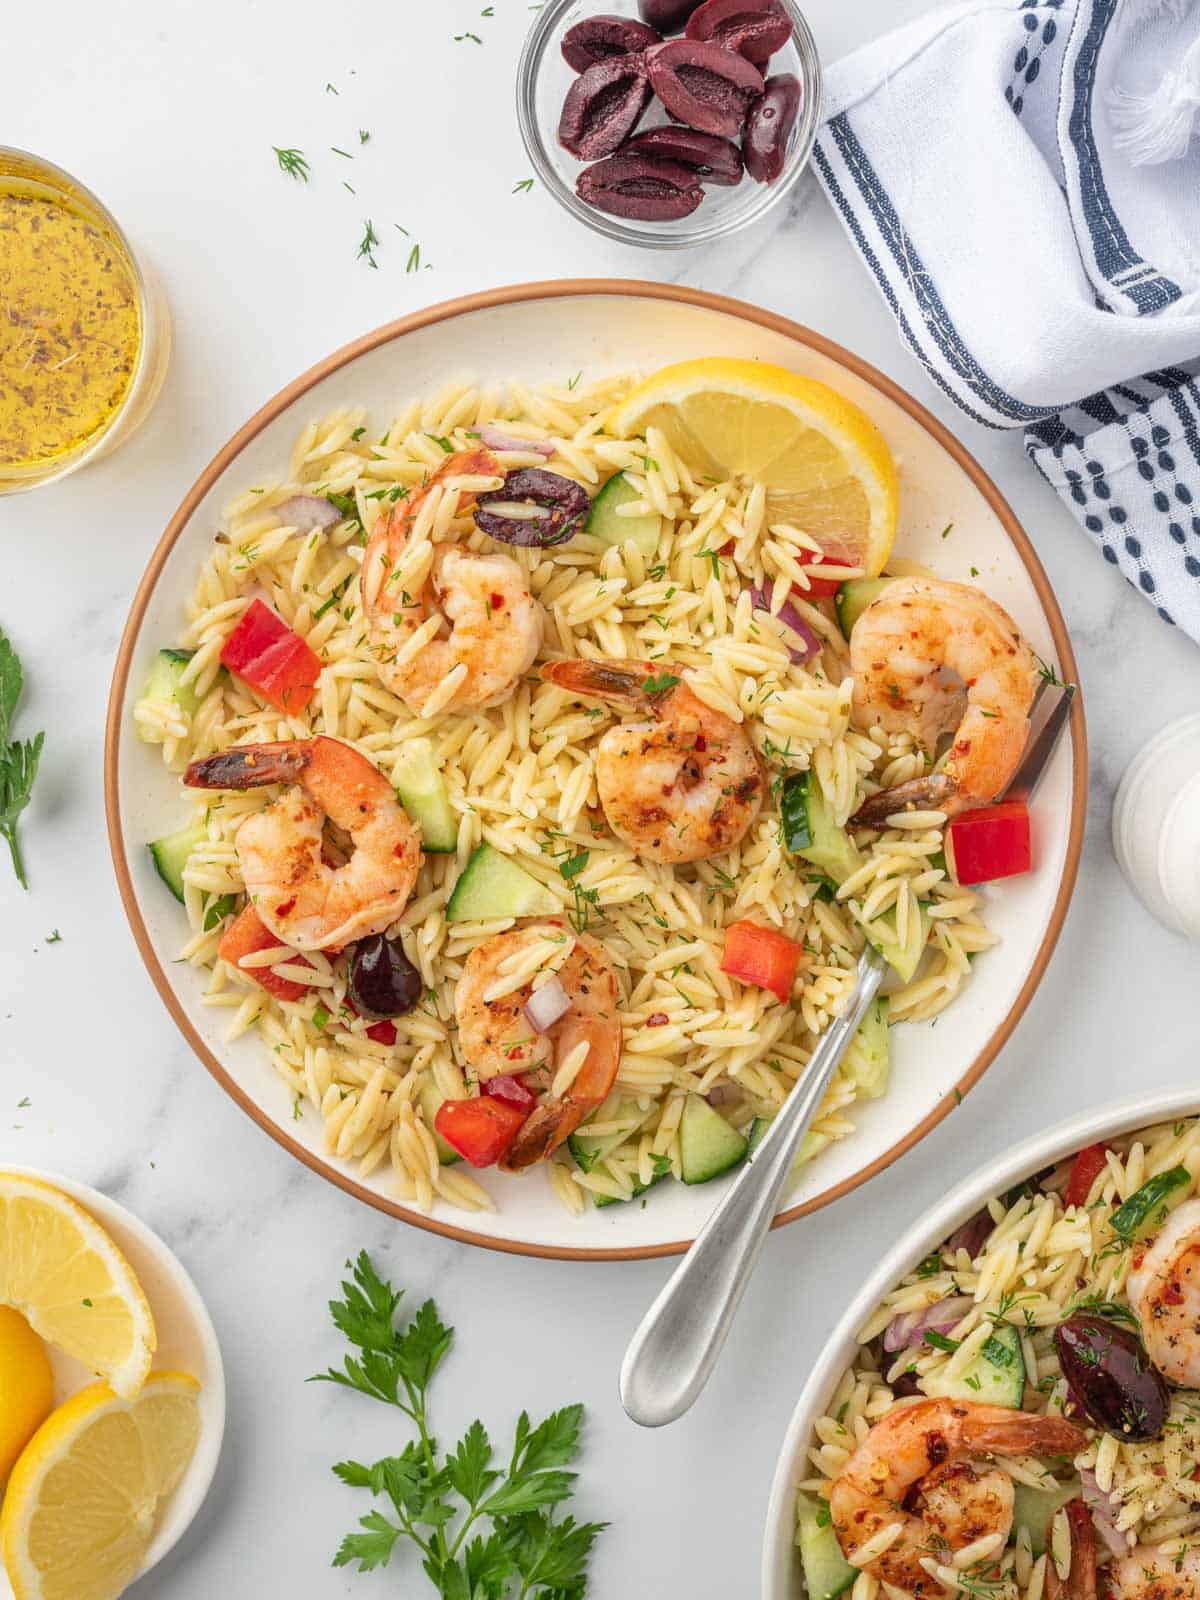 Shrimp orzo salad on a plate with a fork.